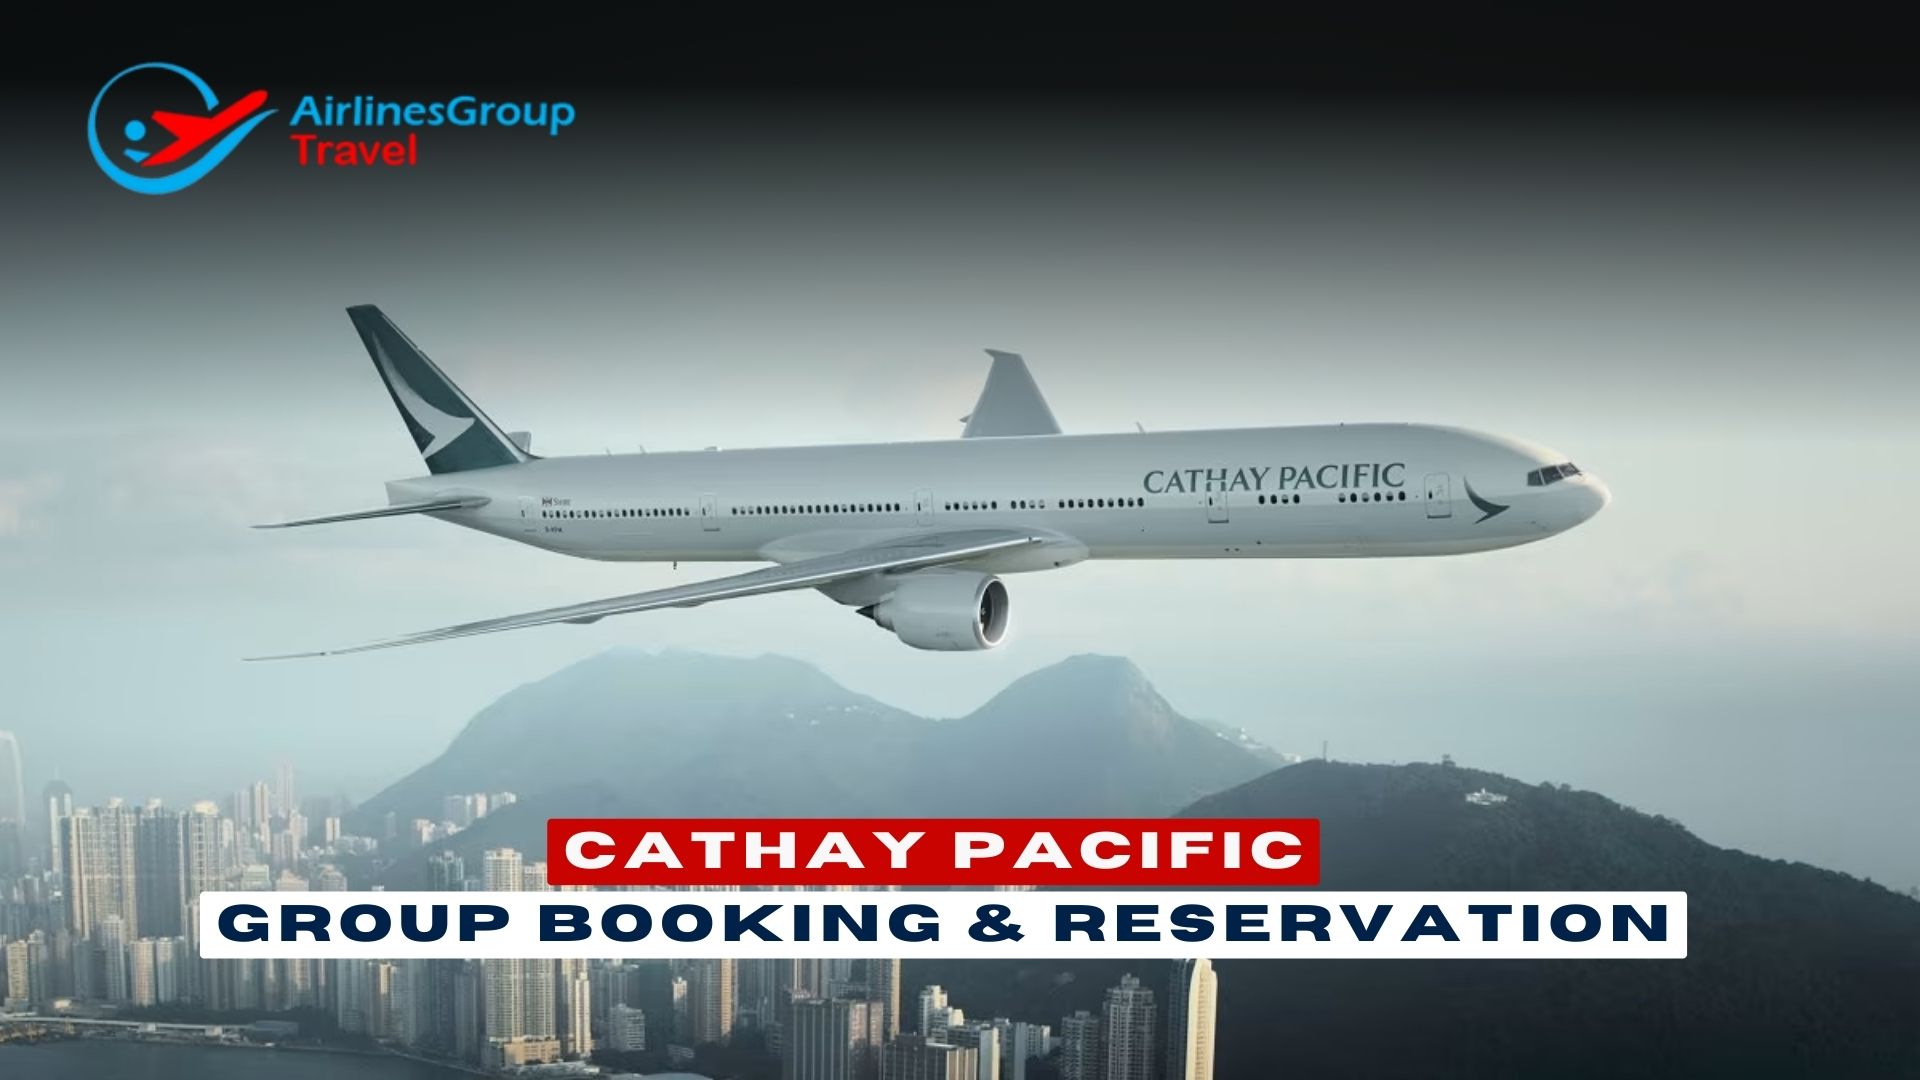 Cathay Pacific Group Booking